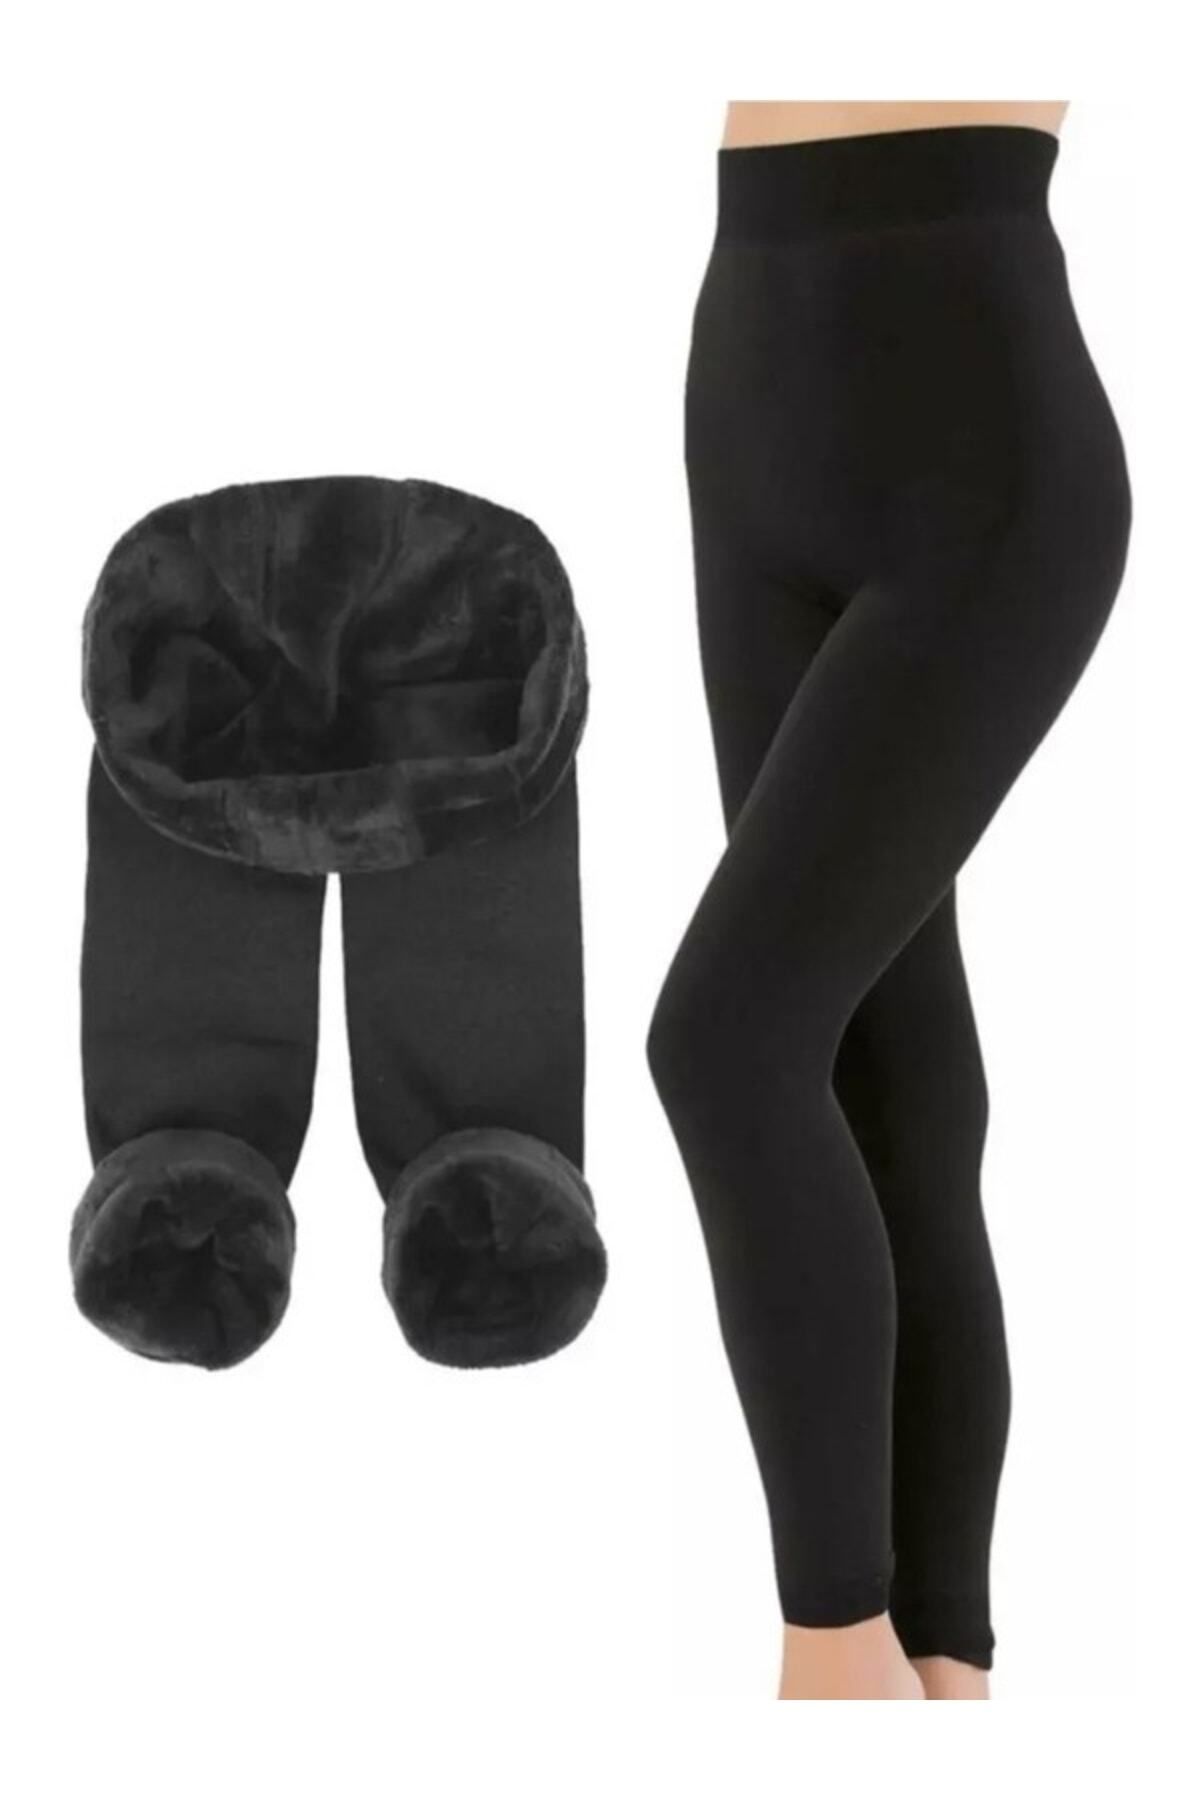 Women's thermal tights - with foot loops